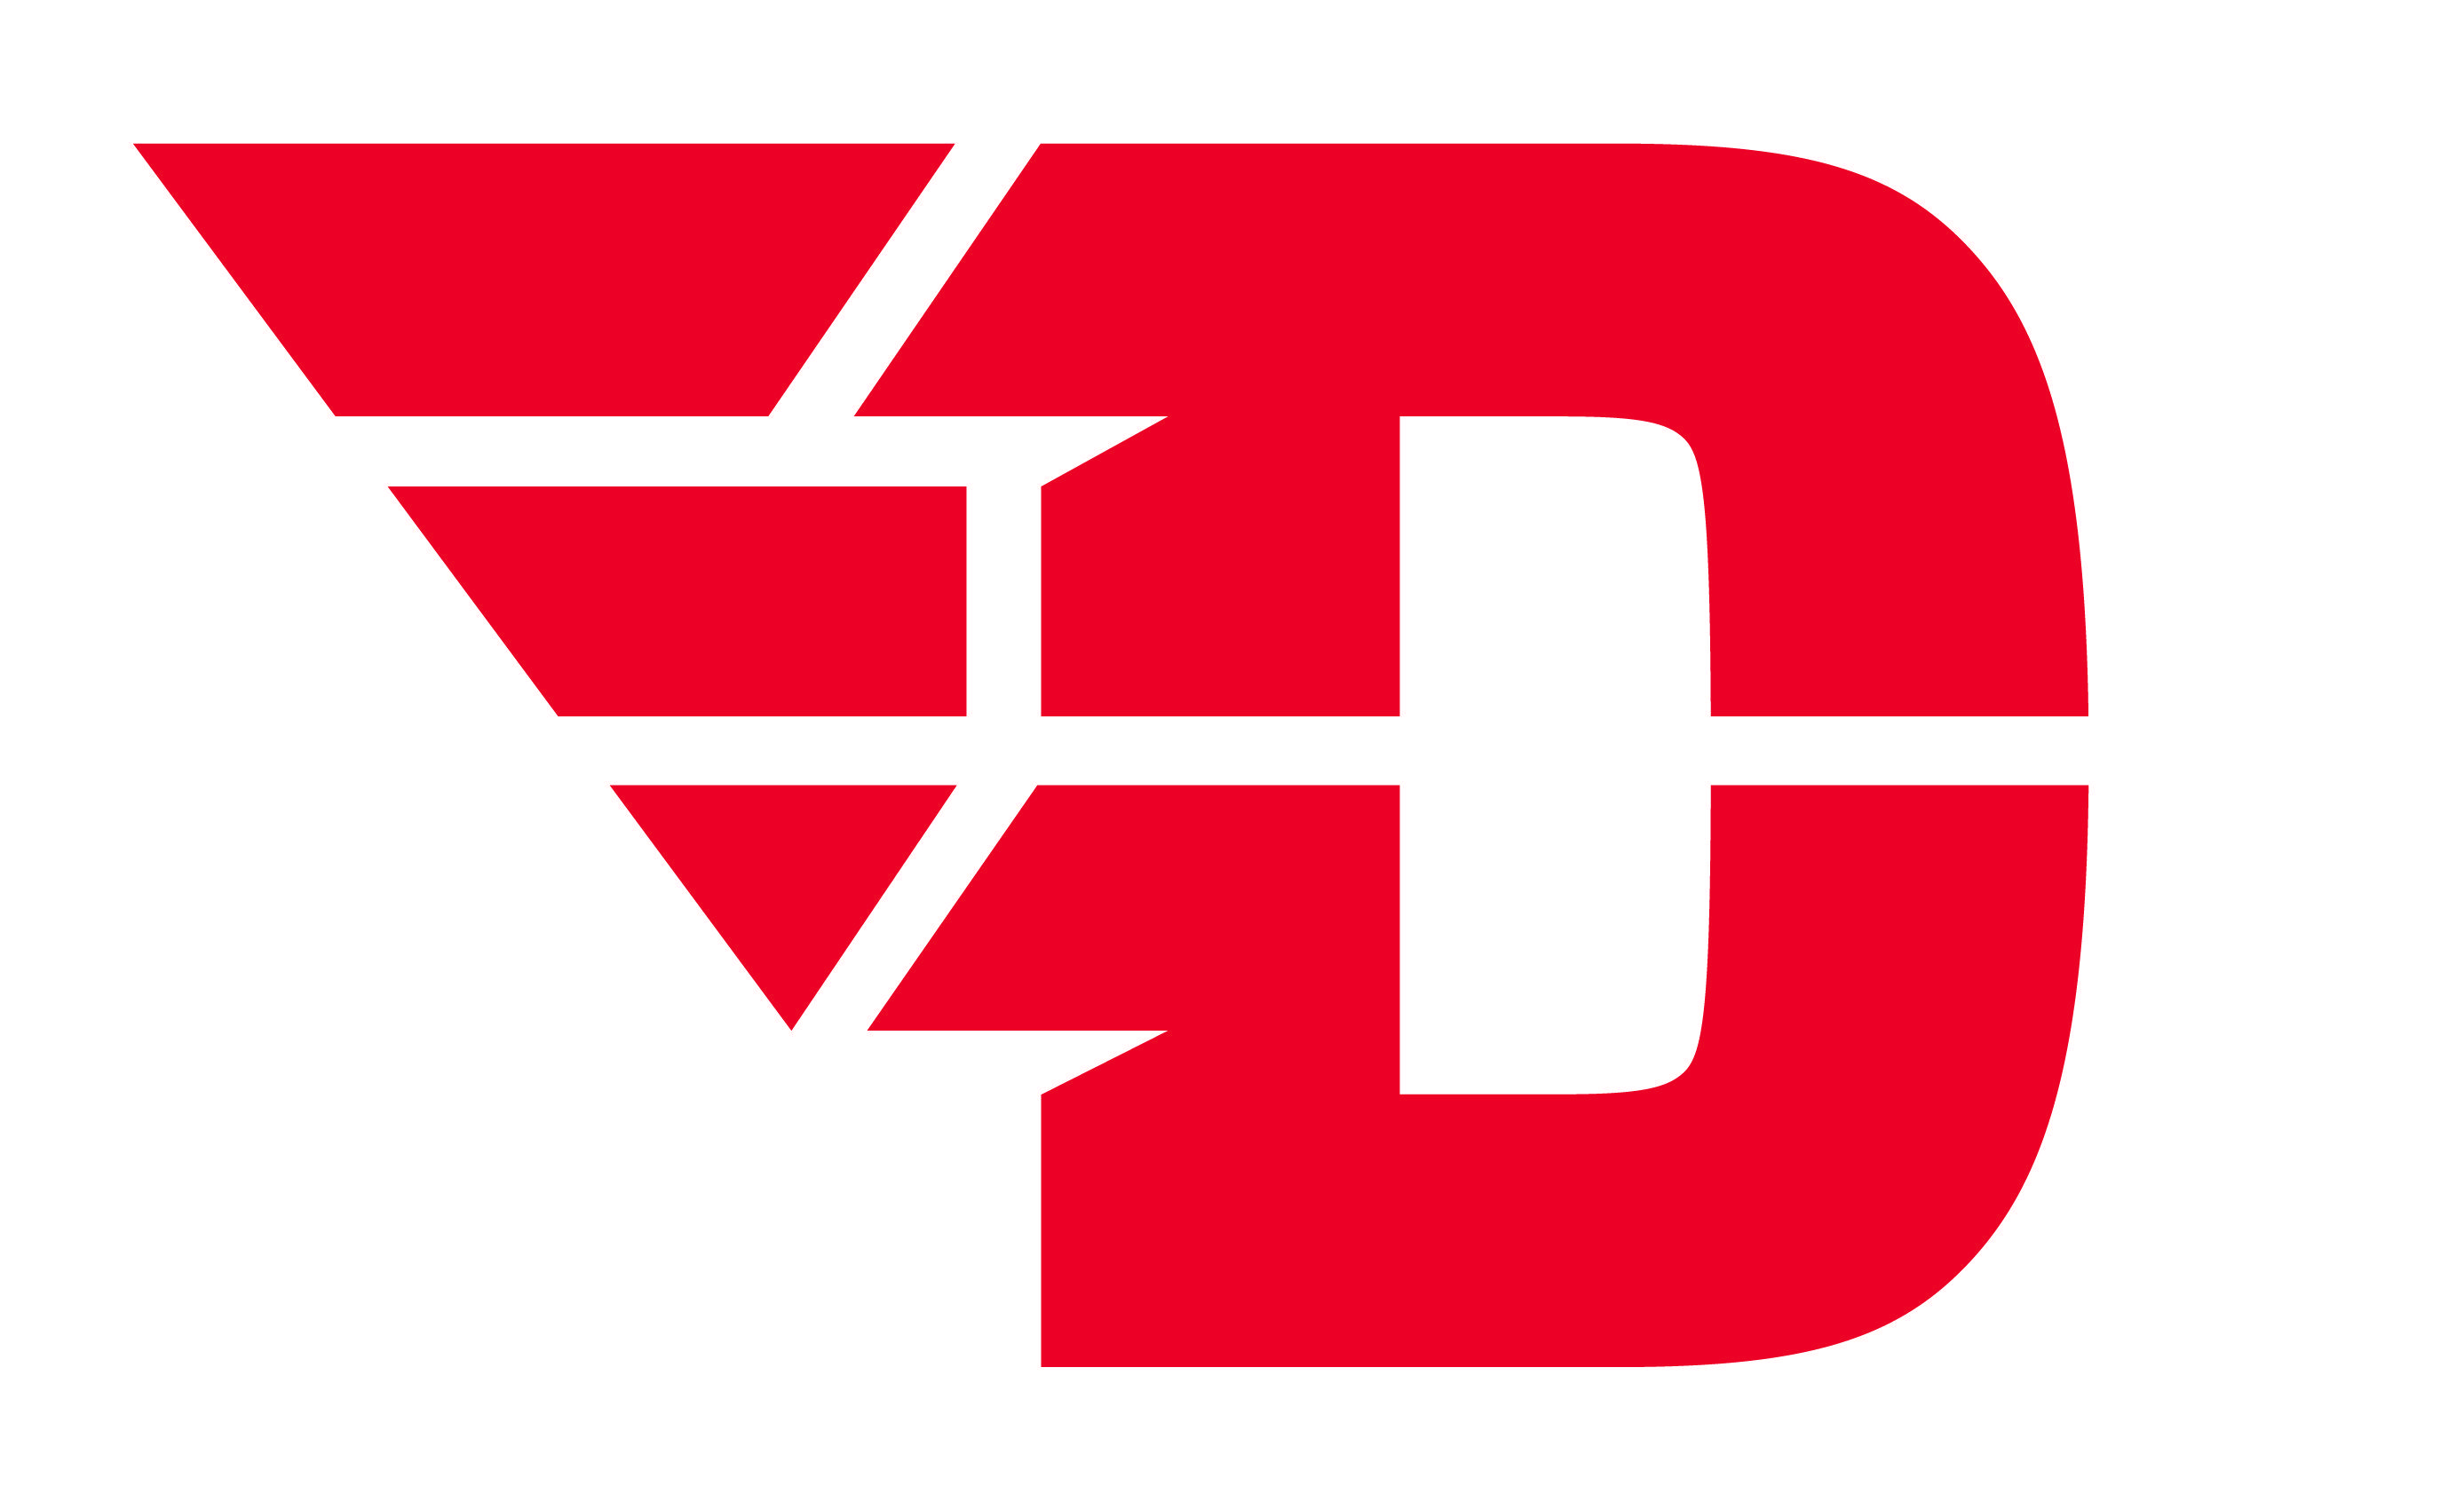 Red D- Logo - File:Dayton Flyers Winged-D Logo Red.jpg - Wikimedia Commons